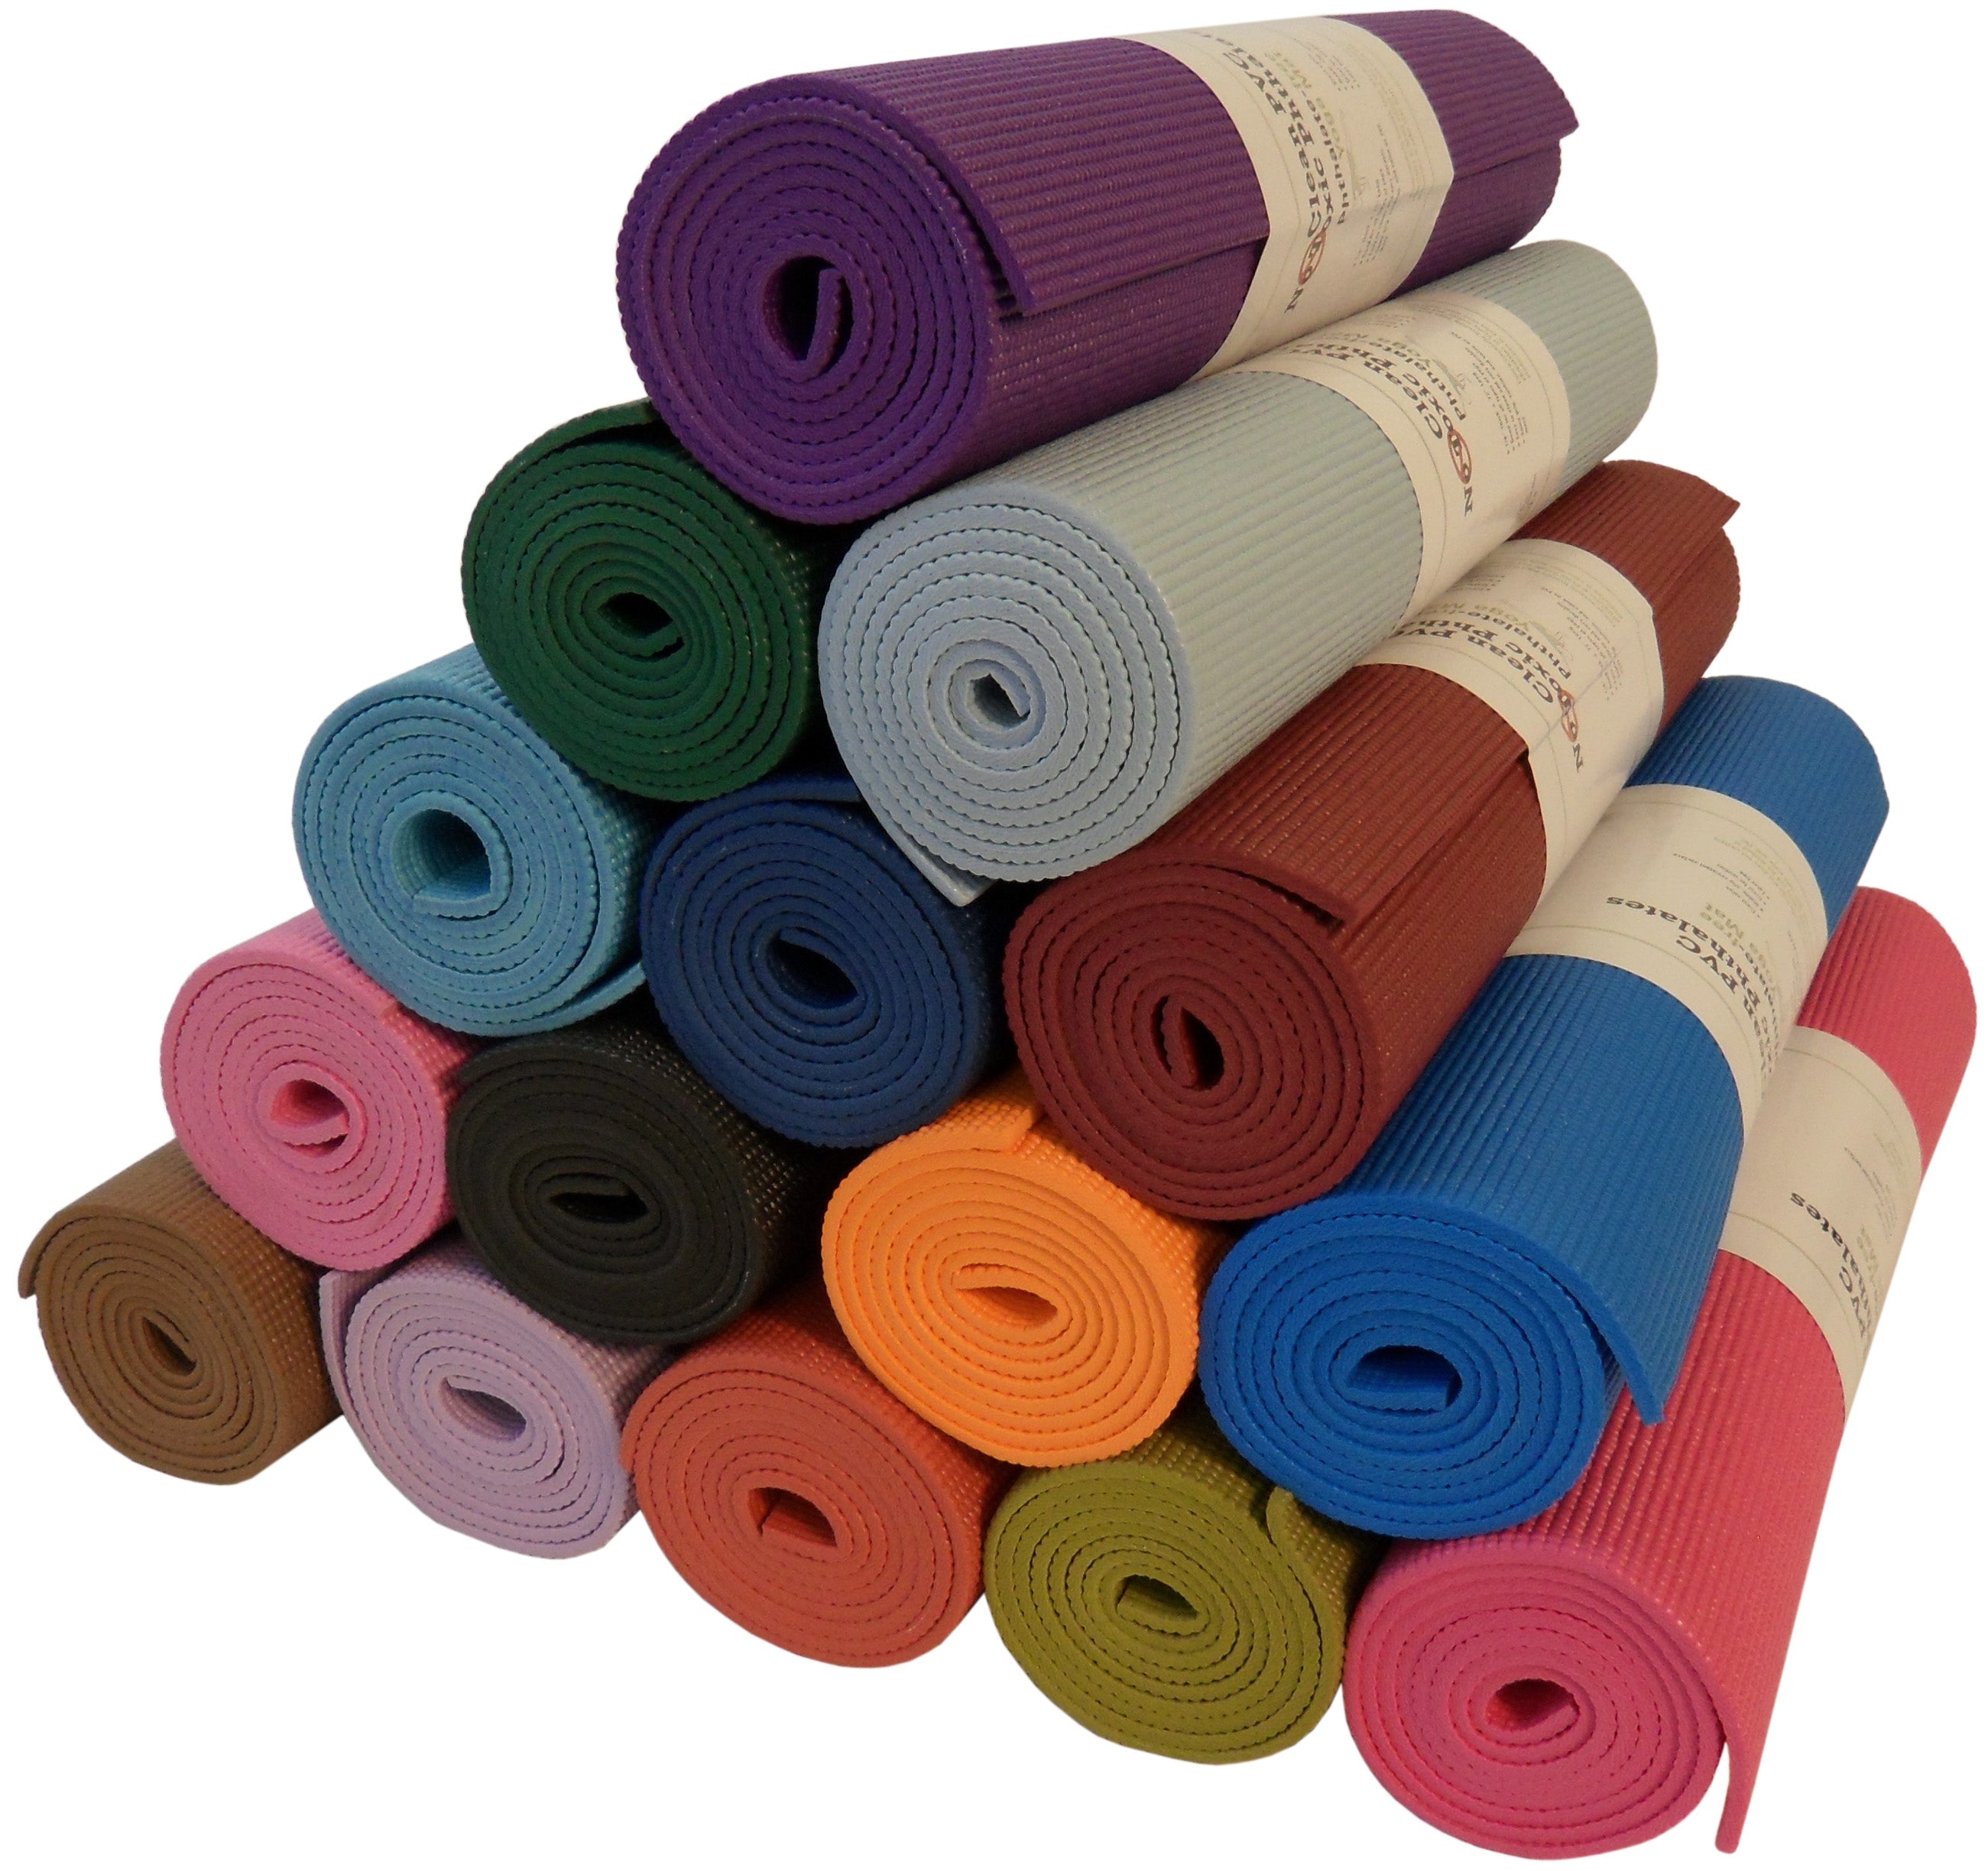 Buy Yoga Mat for home Exercise Online Price in Pakistan 